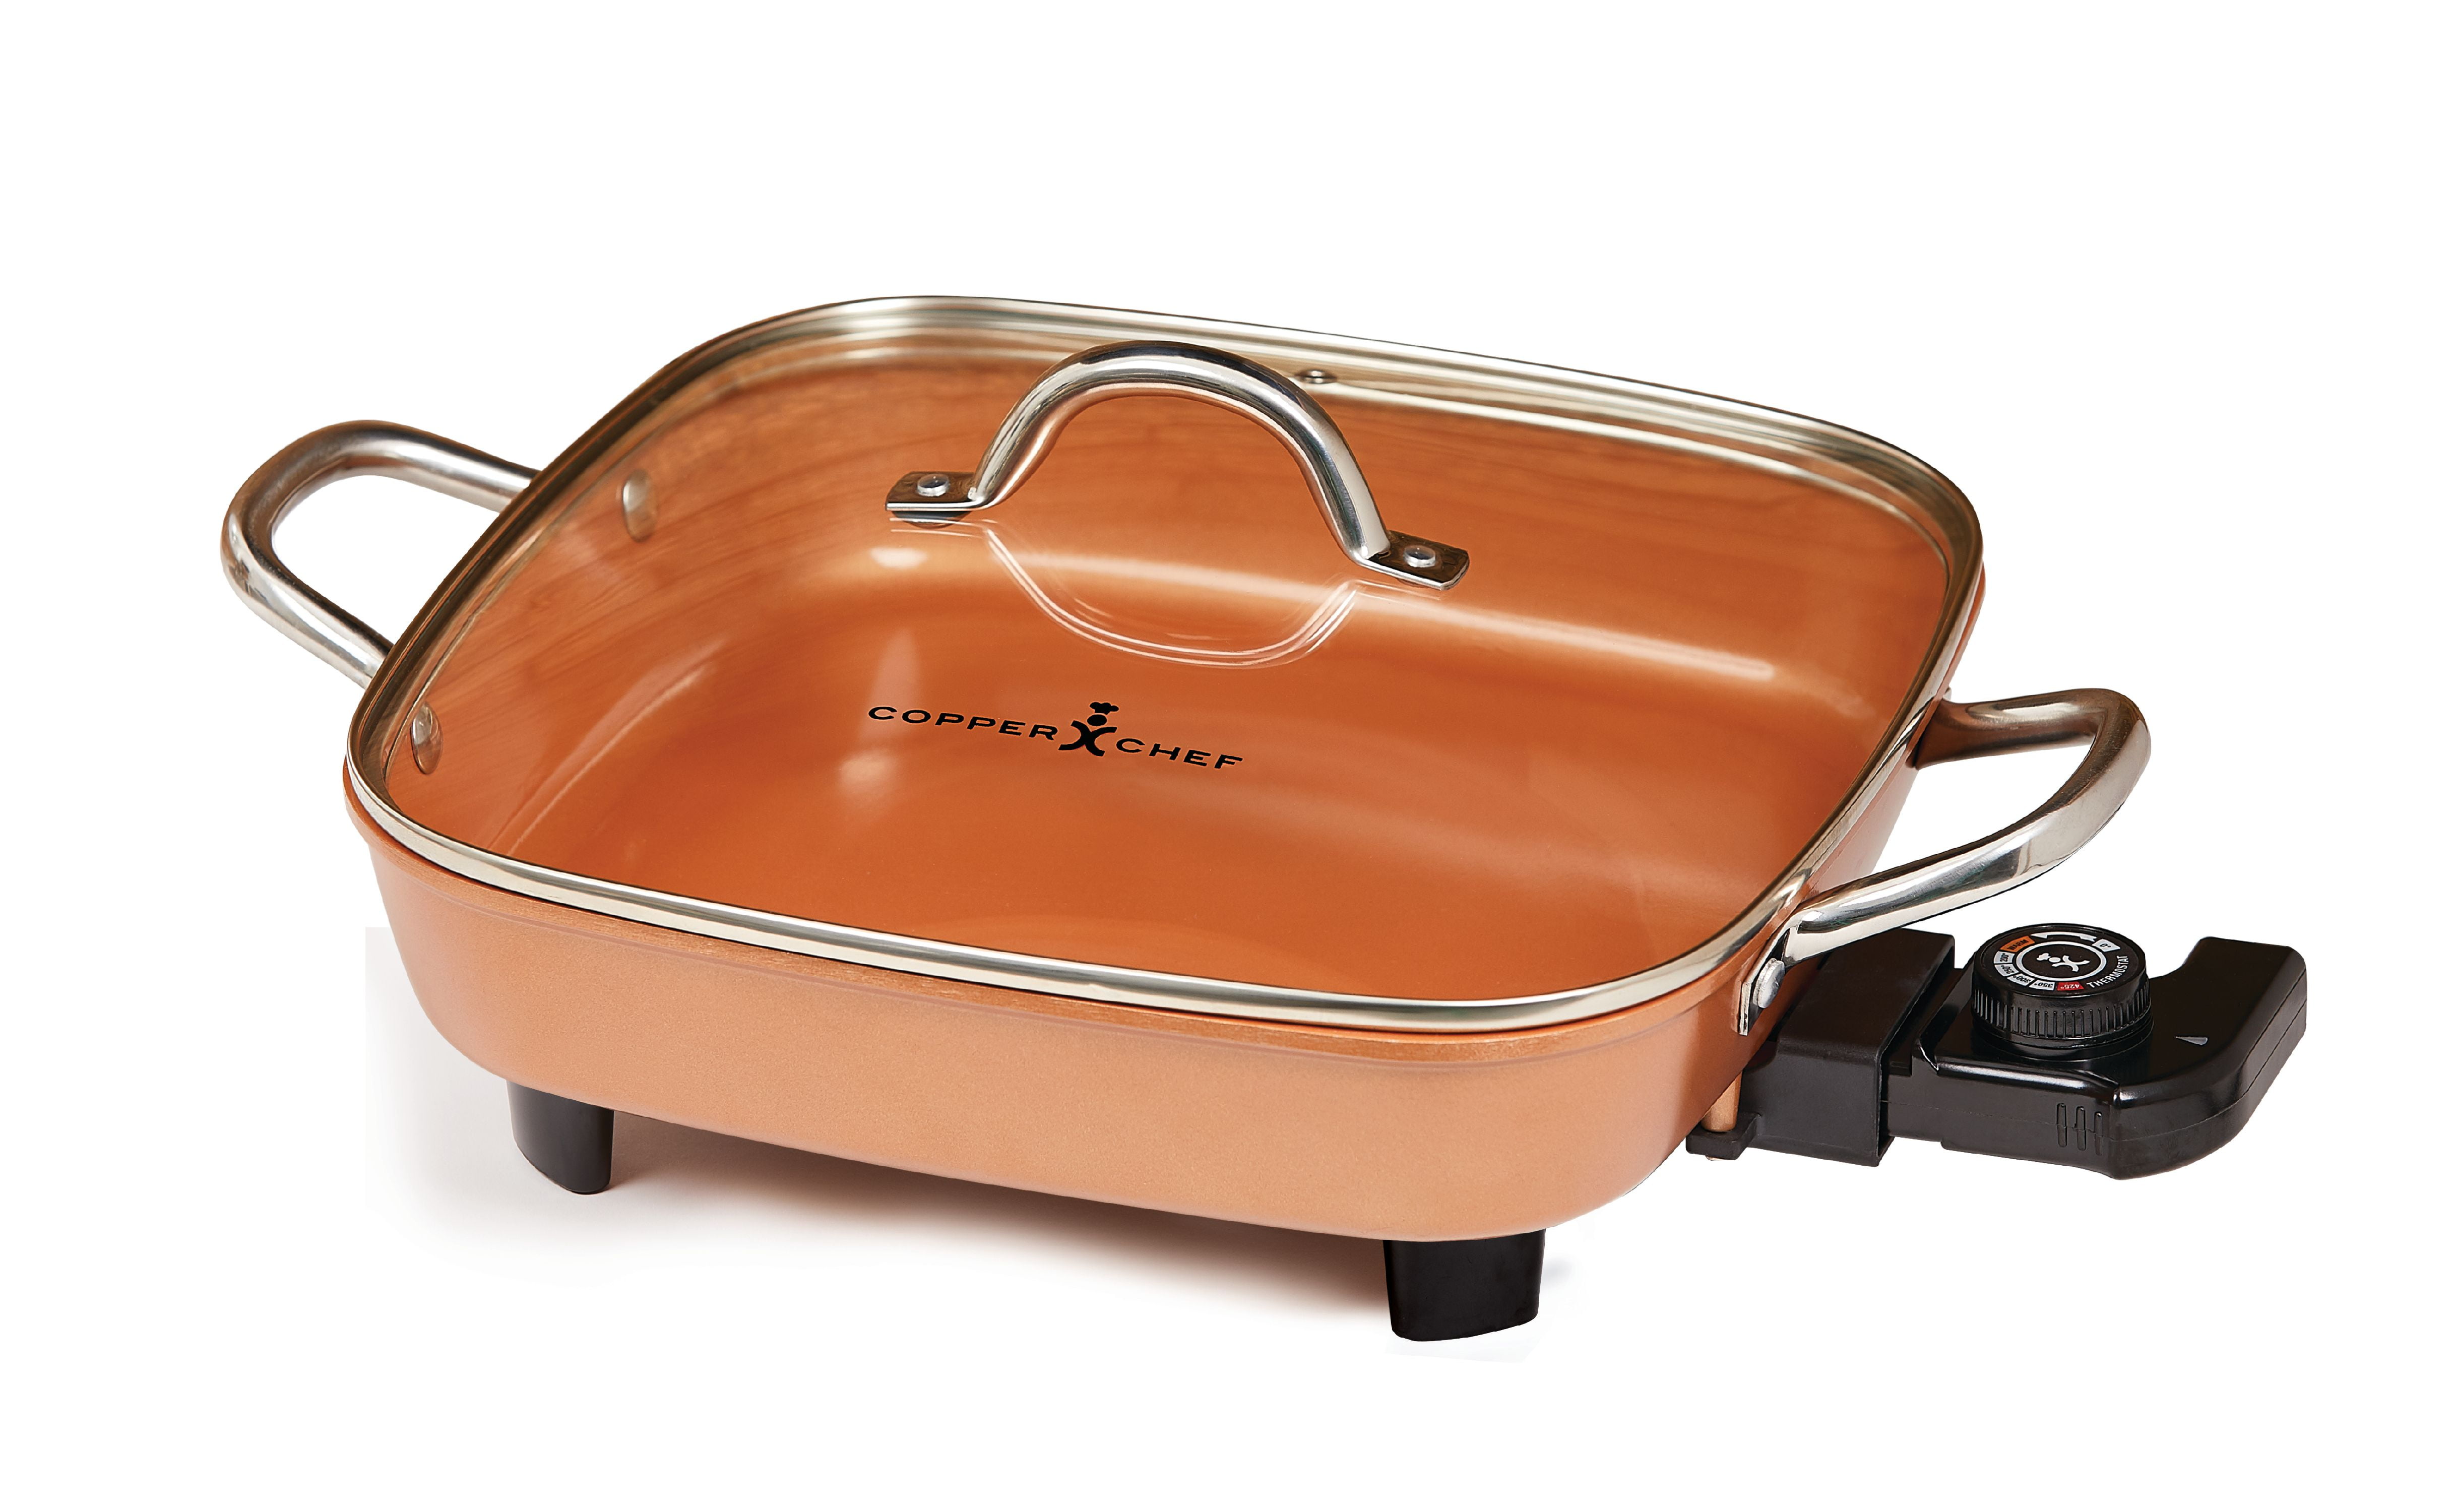 Copper Chef 12” Removable Electric Skillet - household items - by owner -  housewares sale - craigslist